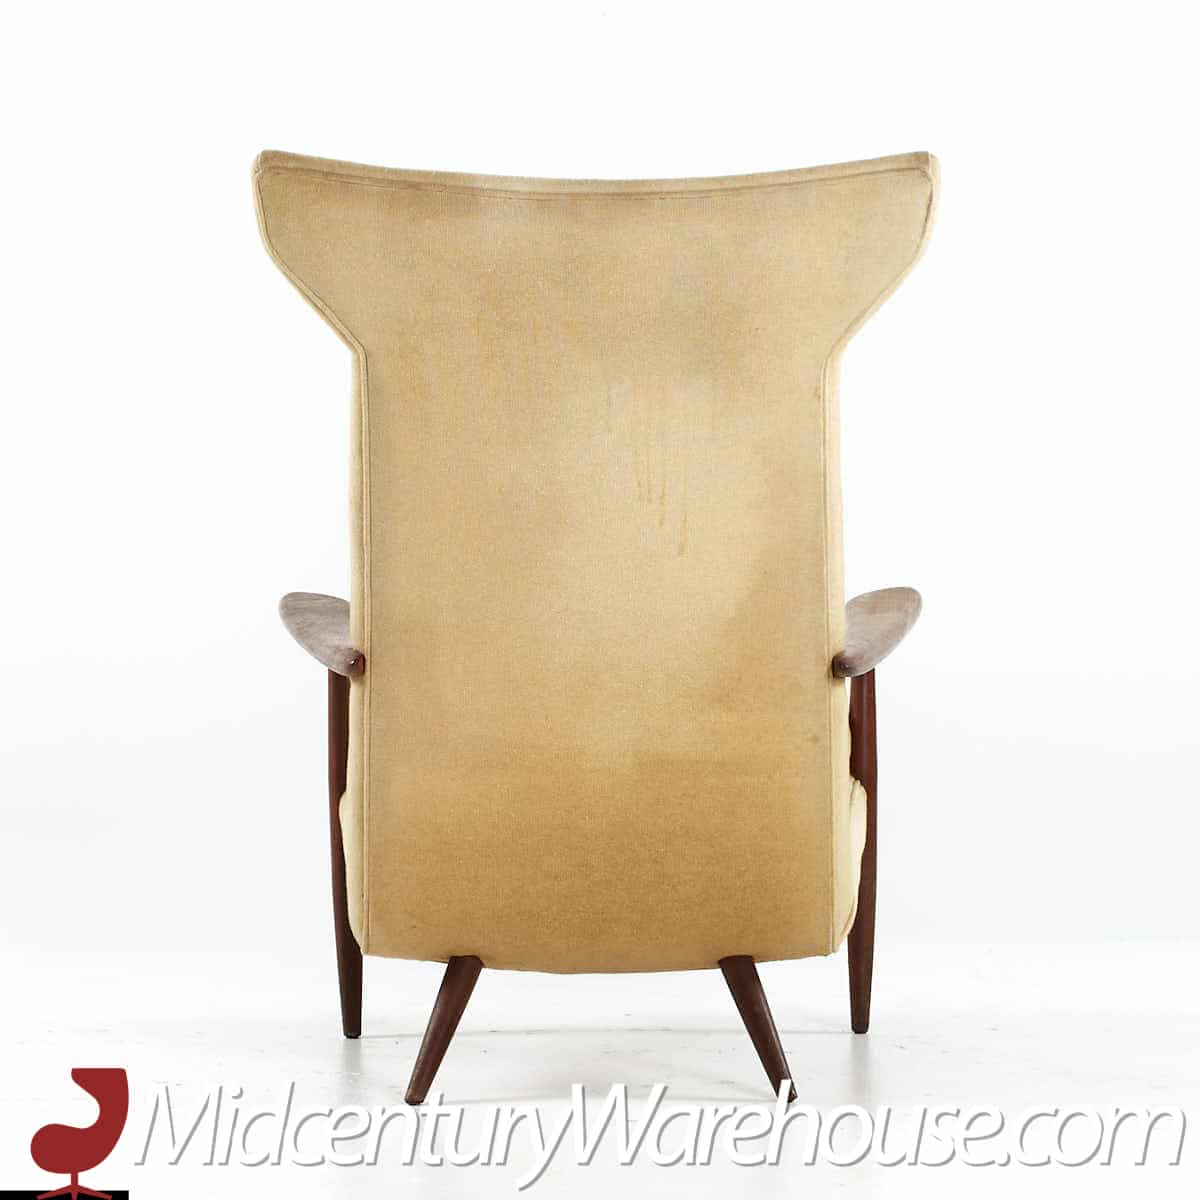 George Nakashima for Widdicomb Mid Century #257-w Wing Back Lounge Chair